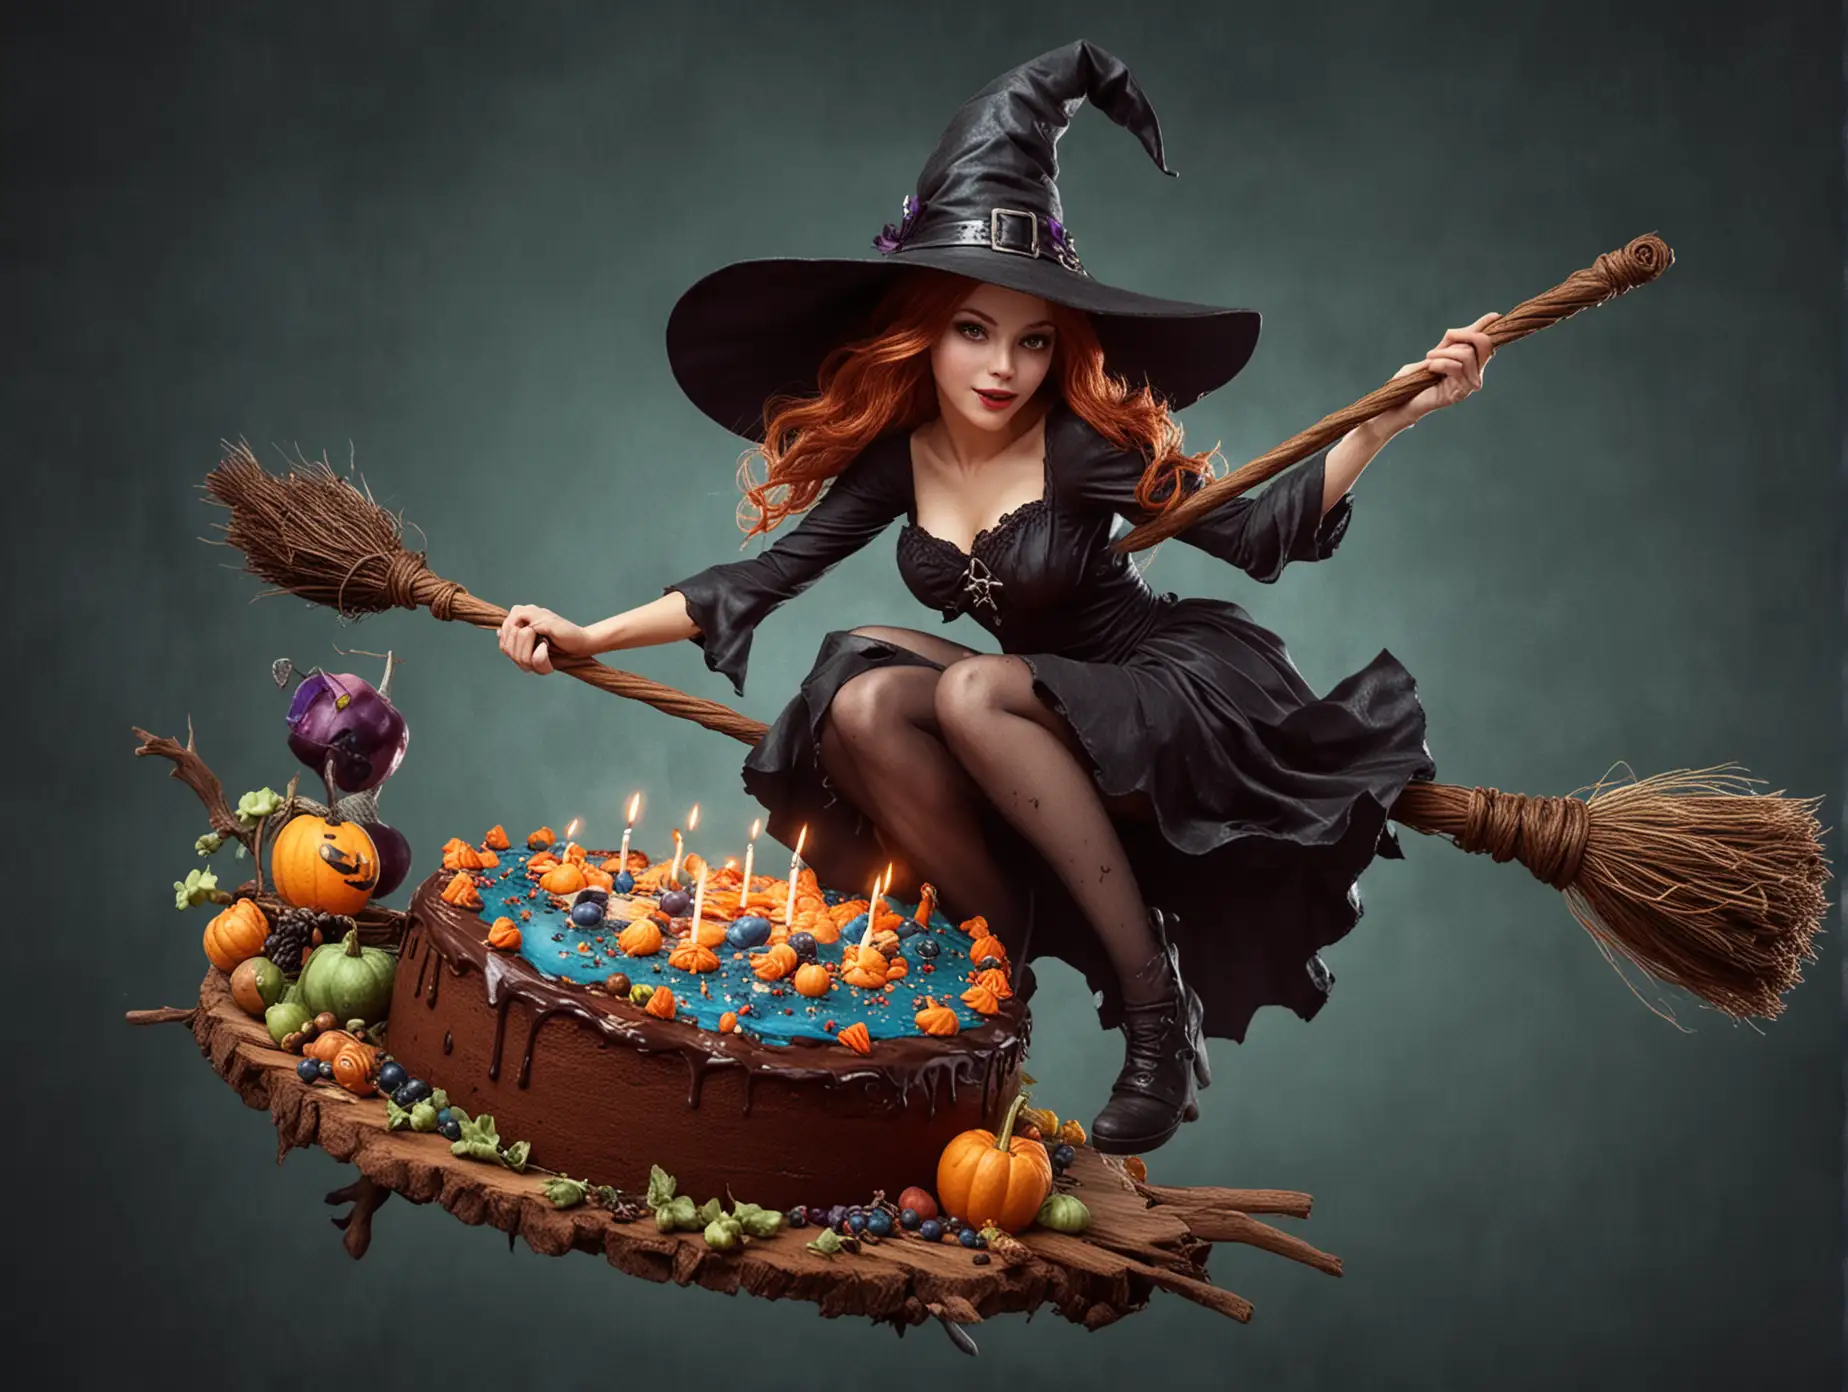 Enchanting-Witch-Flying-on-Broomstick-with-Birthday-Cake